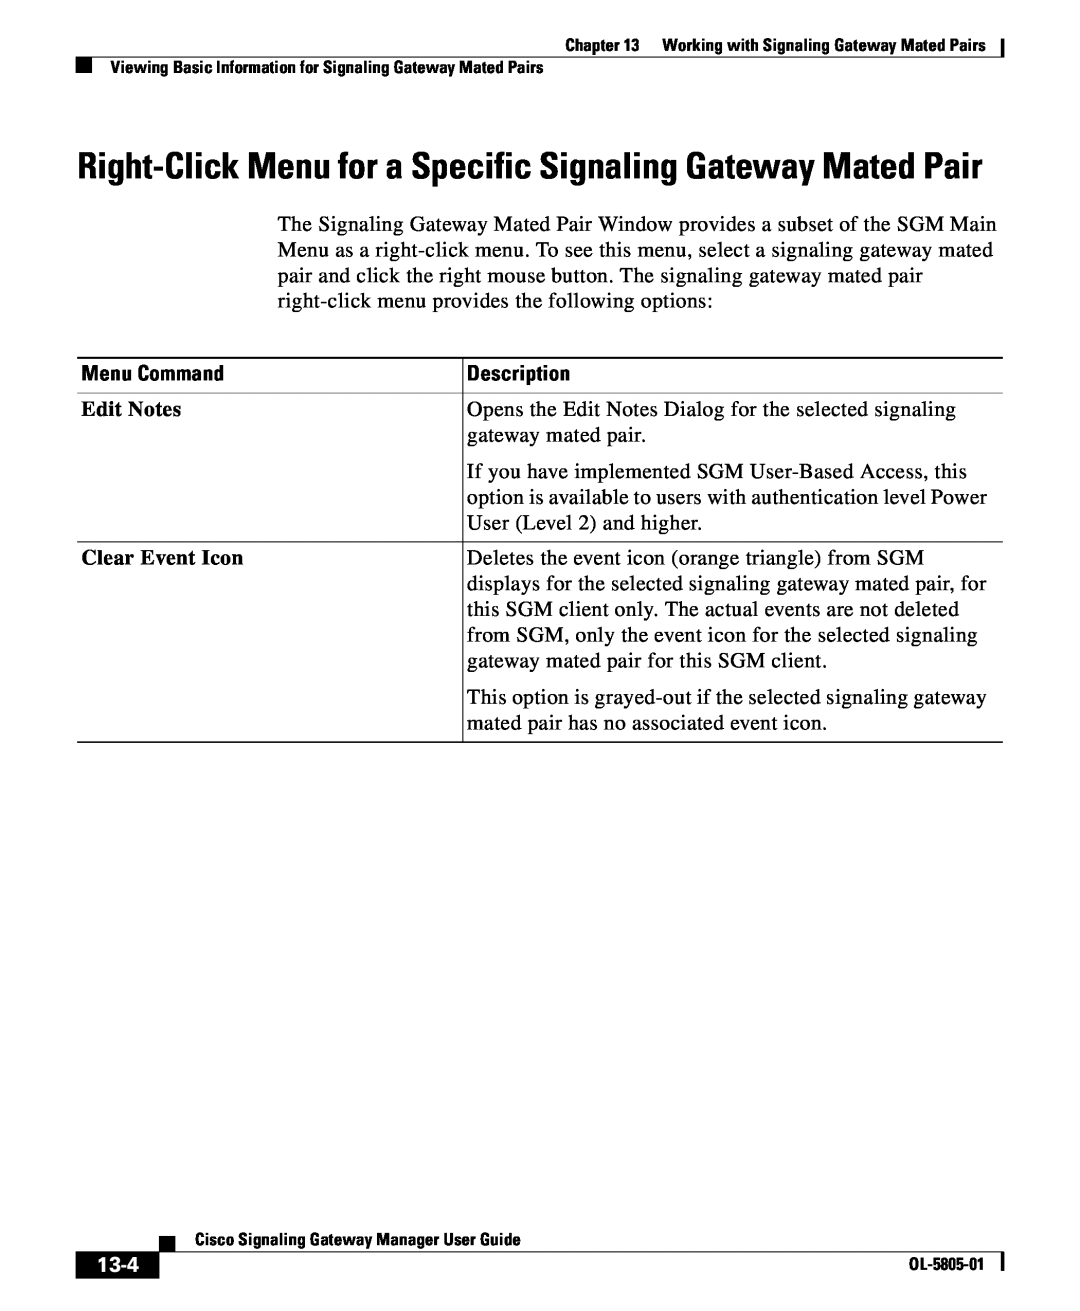 Cisco Systems OL-5805-01 Right-Click Menu for a Specific Signaling Gateway Mated Pair, 13-4, Menu Command, Description 